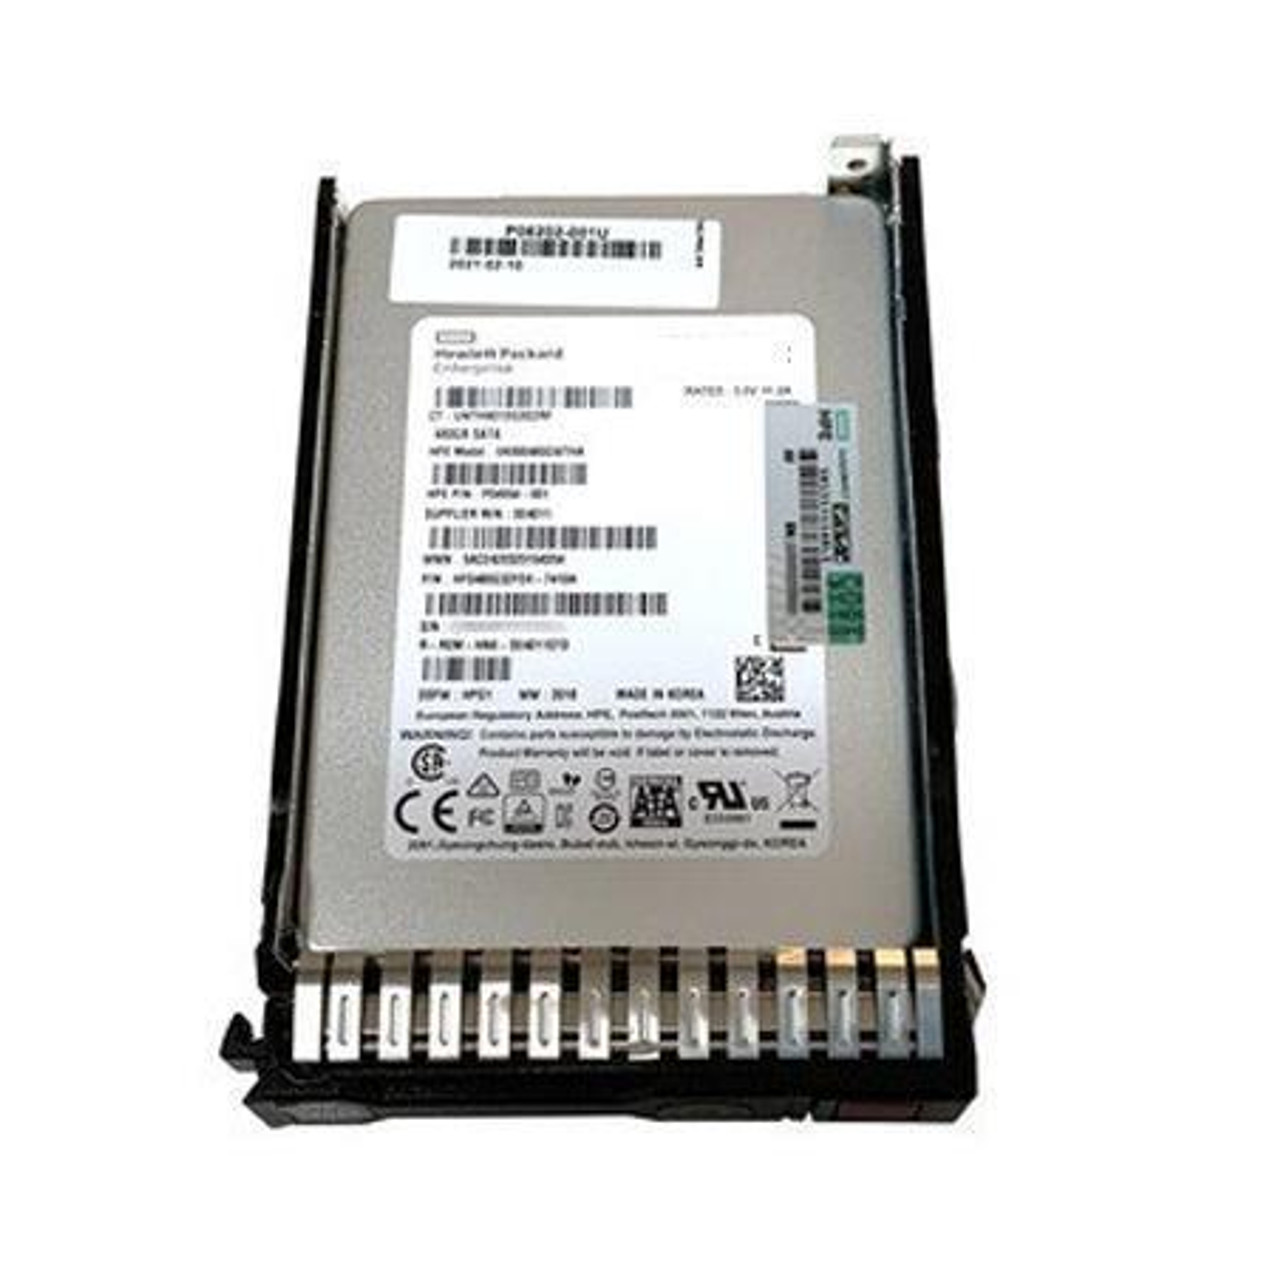 P04474-H21#0D1 HPE 480GB SATA 6Gbps Read Intensive 2.5-inch Internal Solid State Drive (SSD) with Smart Carrier